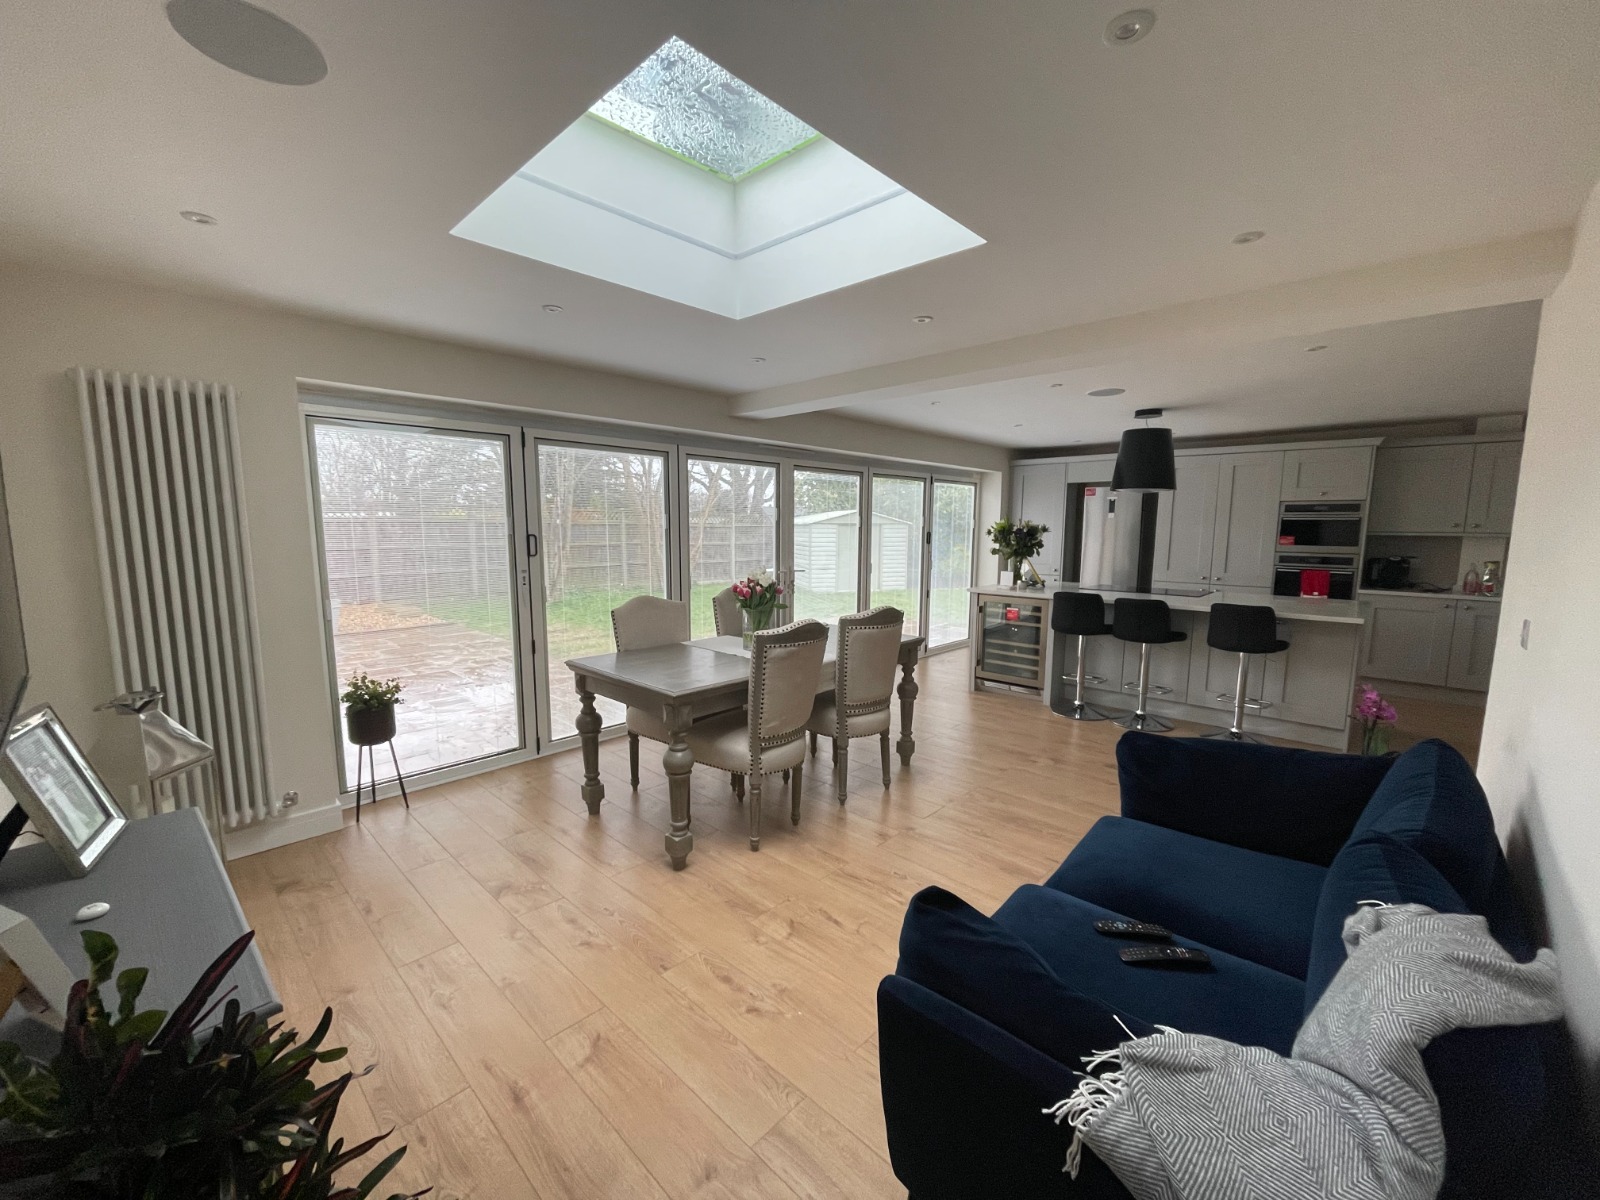 Inside view 02 of Extension Build covering Surrey, Hampshire and London